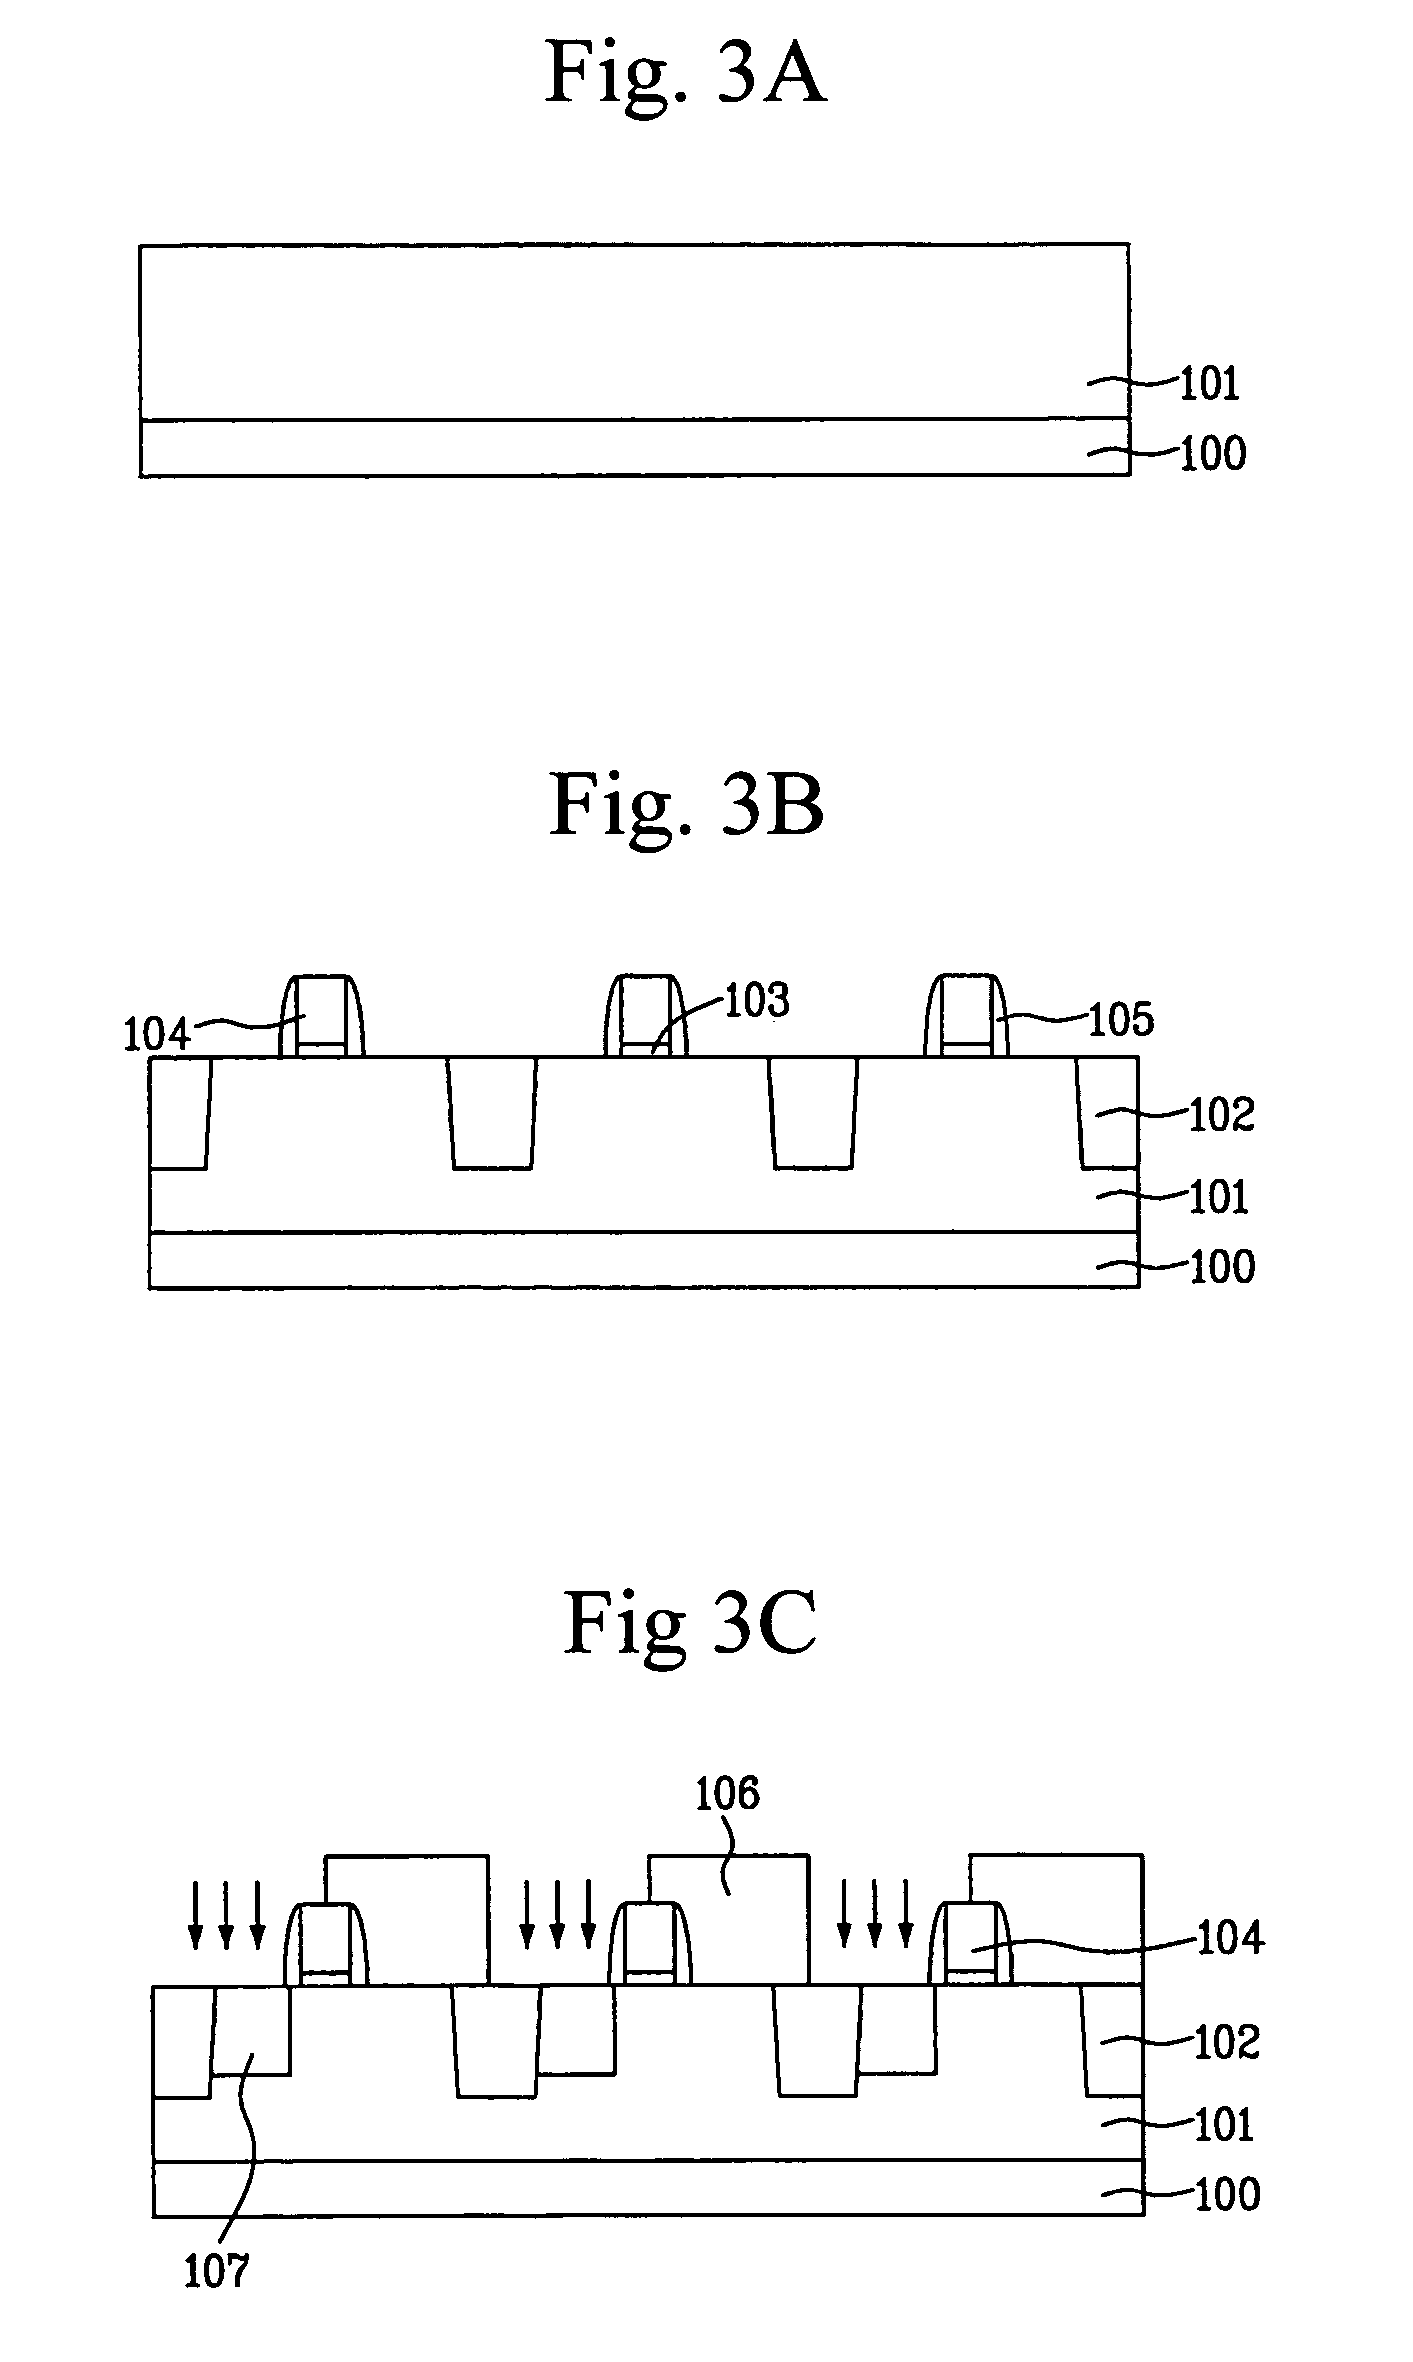 CMOS image sensor for improving the amount of light incident a photodiode